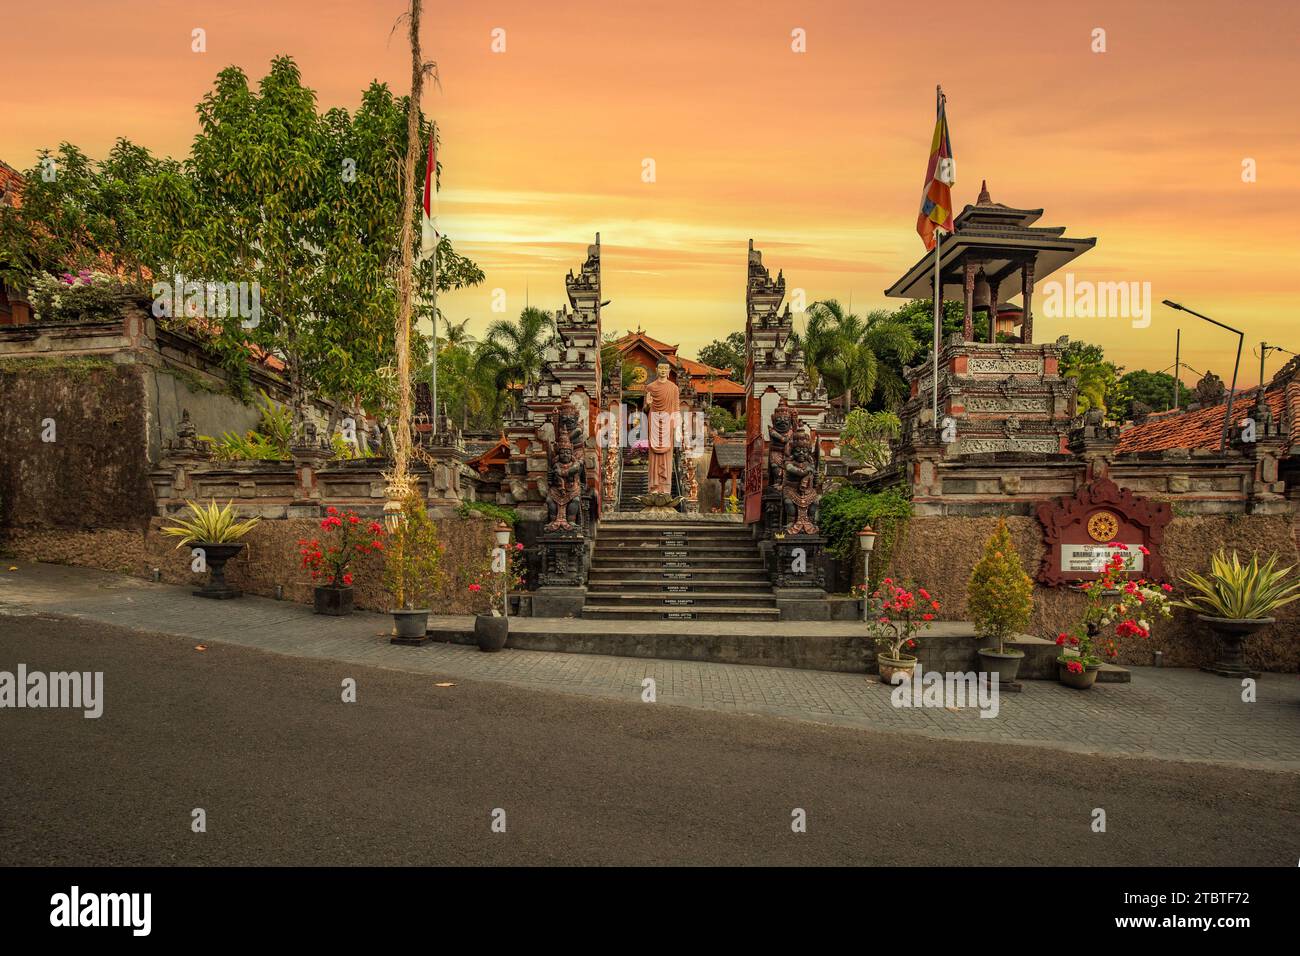 A Buddhist temple in the evening in the rain, the Brahmavihara - Arama temple has beautiful gardens and also houses a monastery, tropical plants near Banjar, Bali Stock Photo